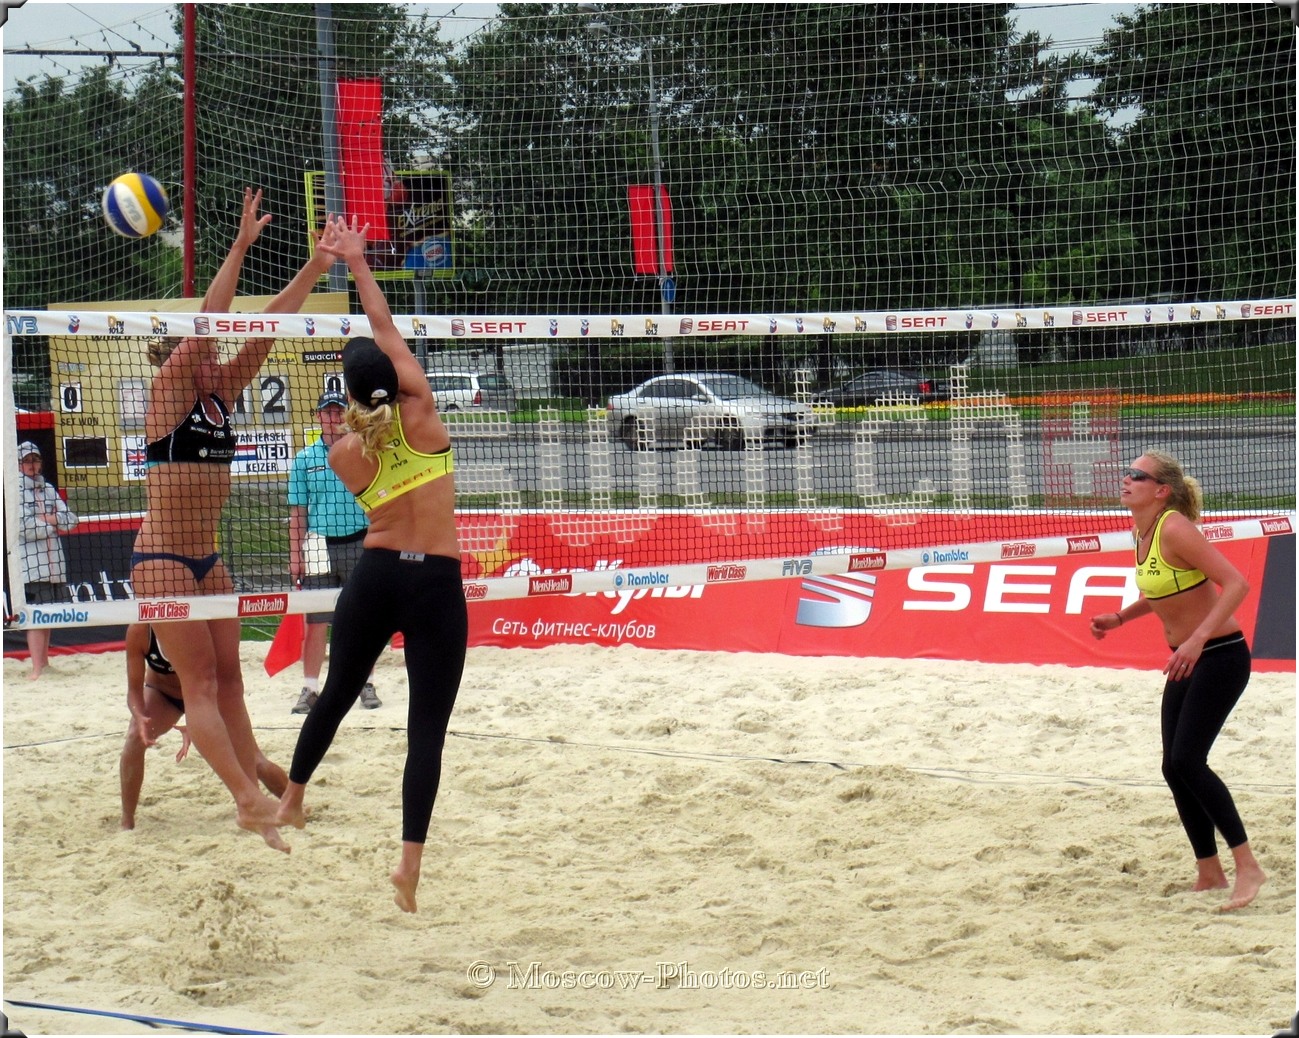 BEACH VOLLEYBALL SPIKE AGAINST THE BLOCK